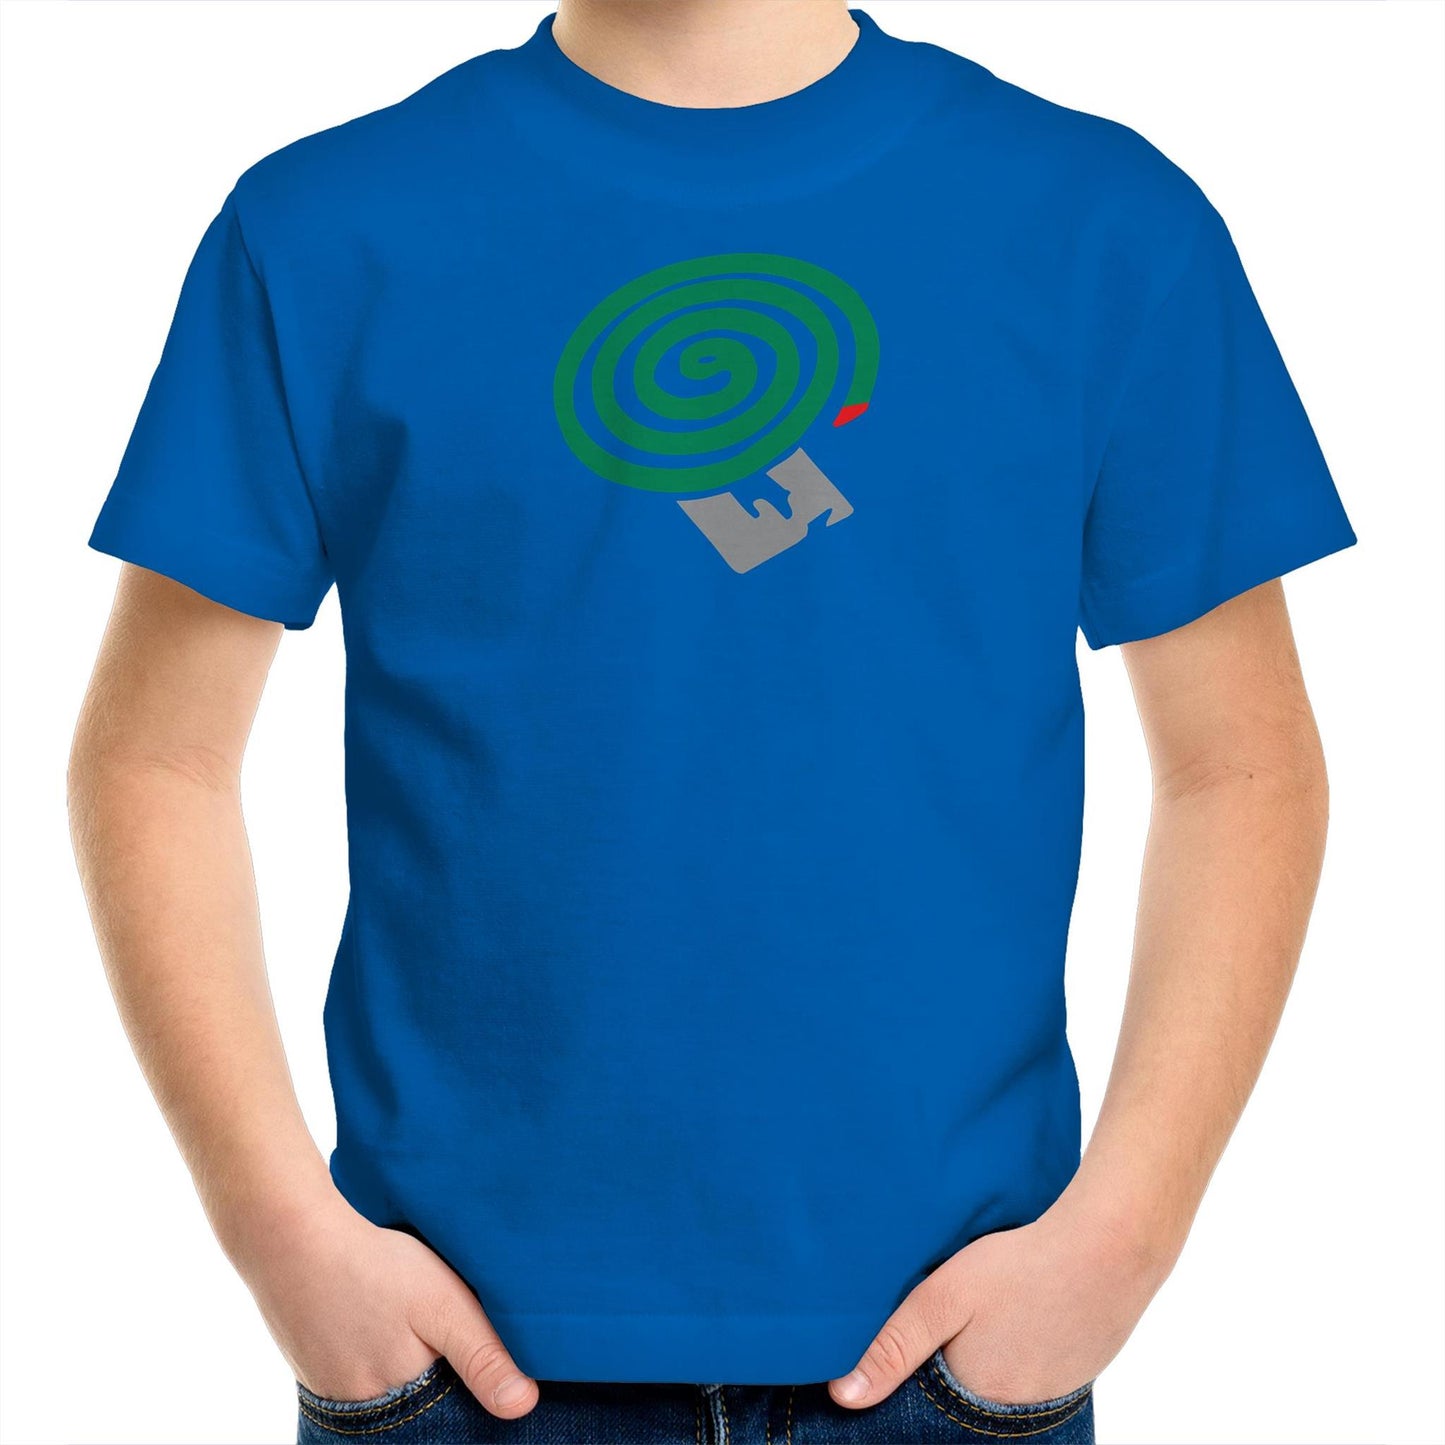 Mosquito Coil T Shirts for Kids